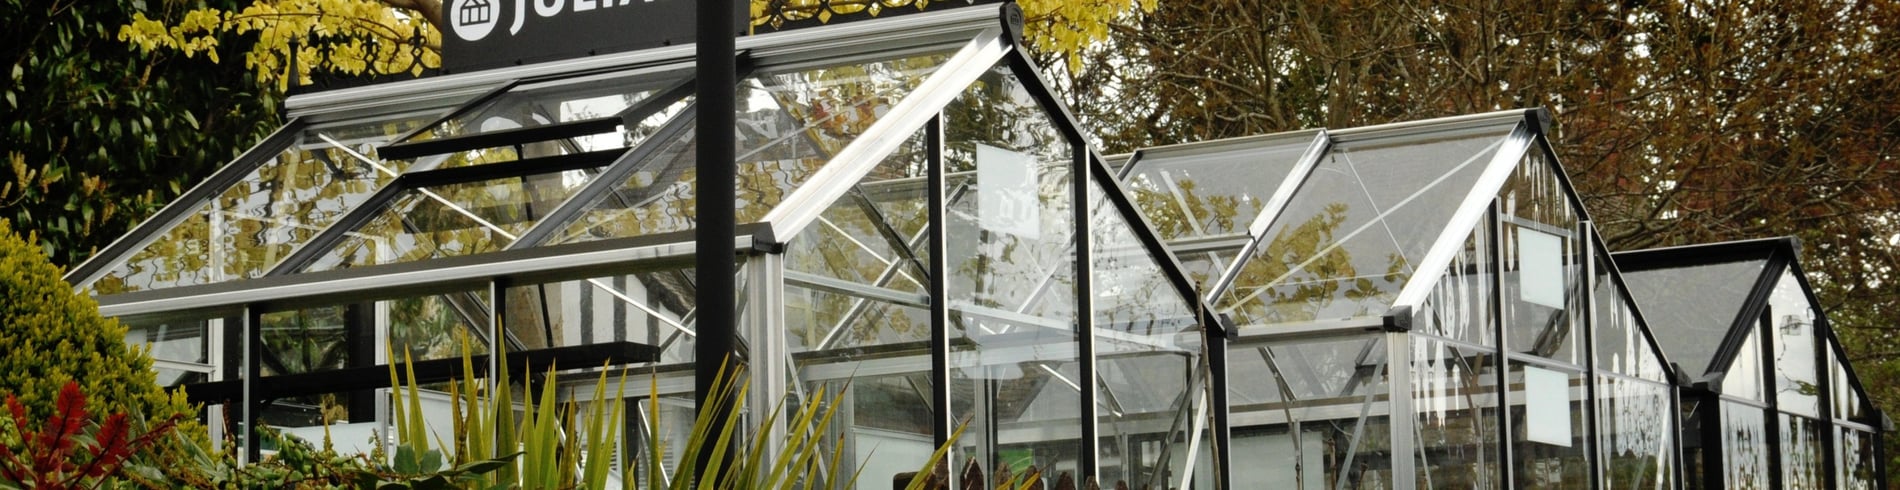 An assortment of greenhouses on display